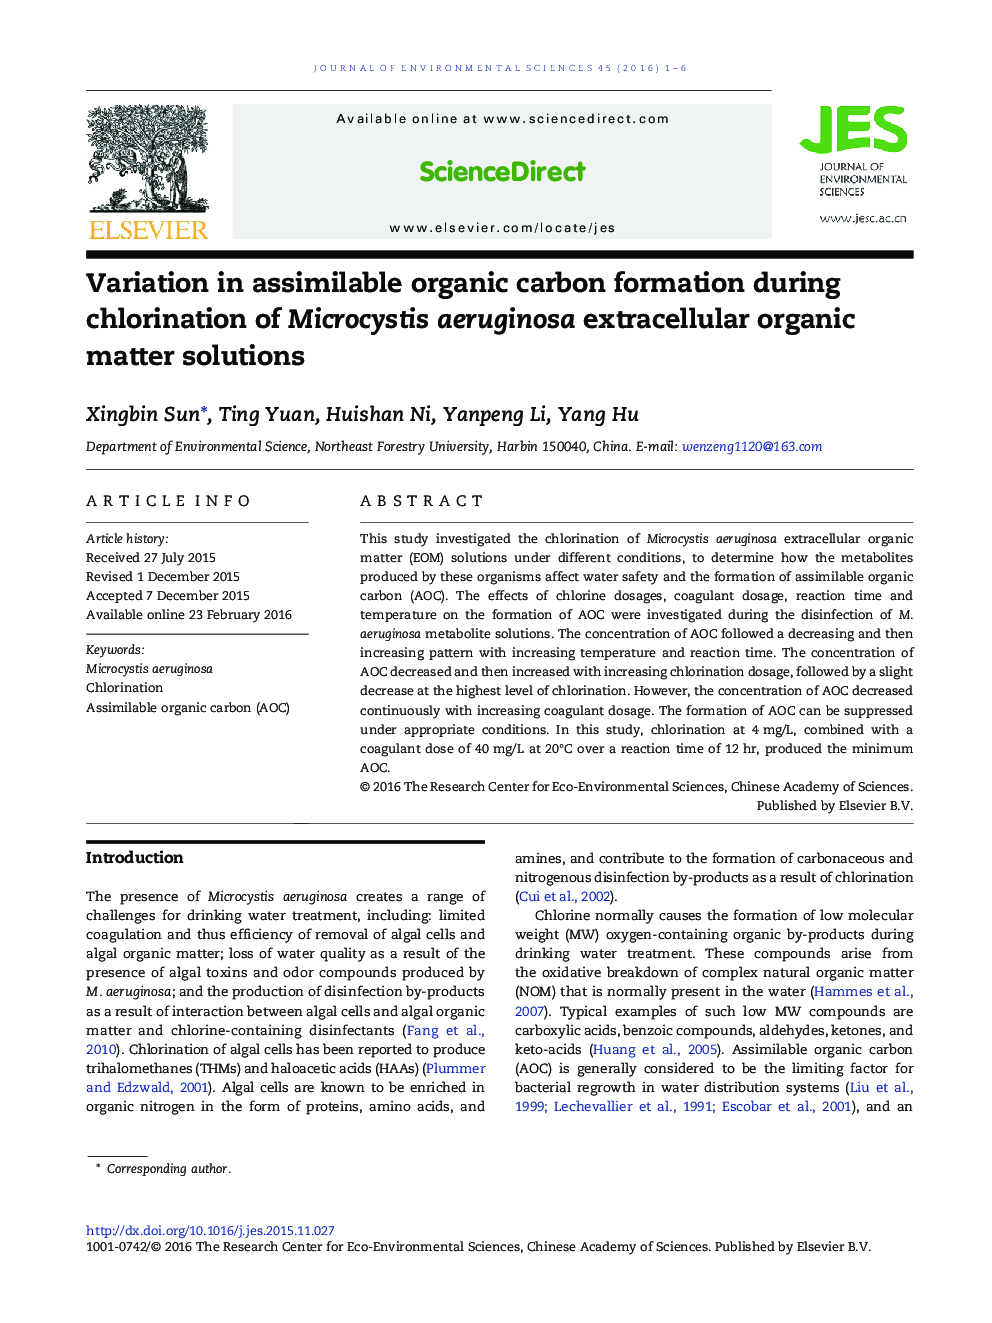 Variation in assimilable organic carbon formation during chlorination of Microcystis aeruginosa extracellular organic matter solutions